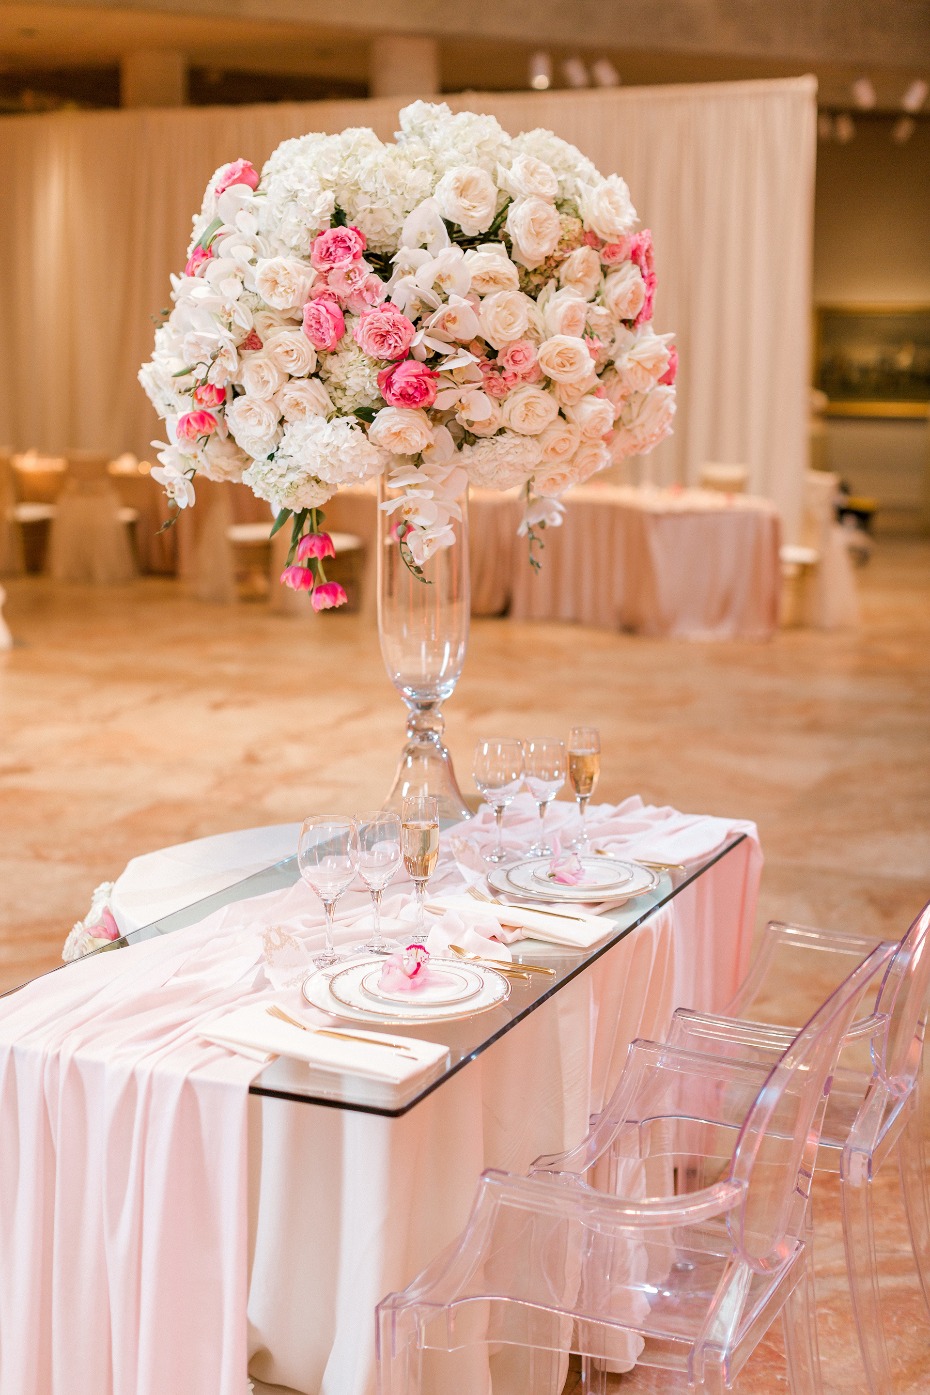 Grand sweetheart table in blush